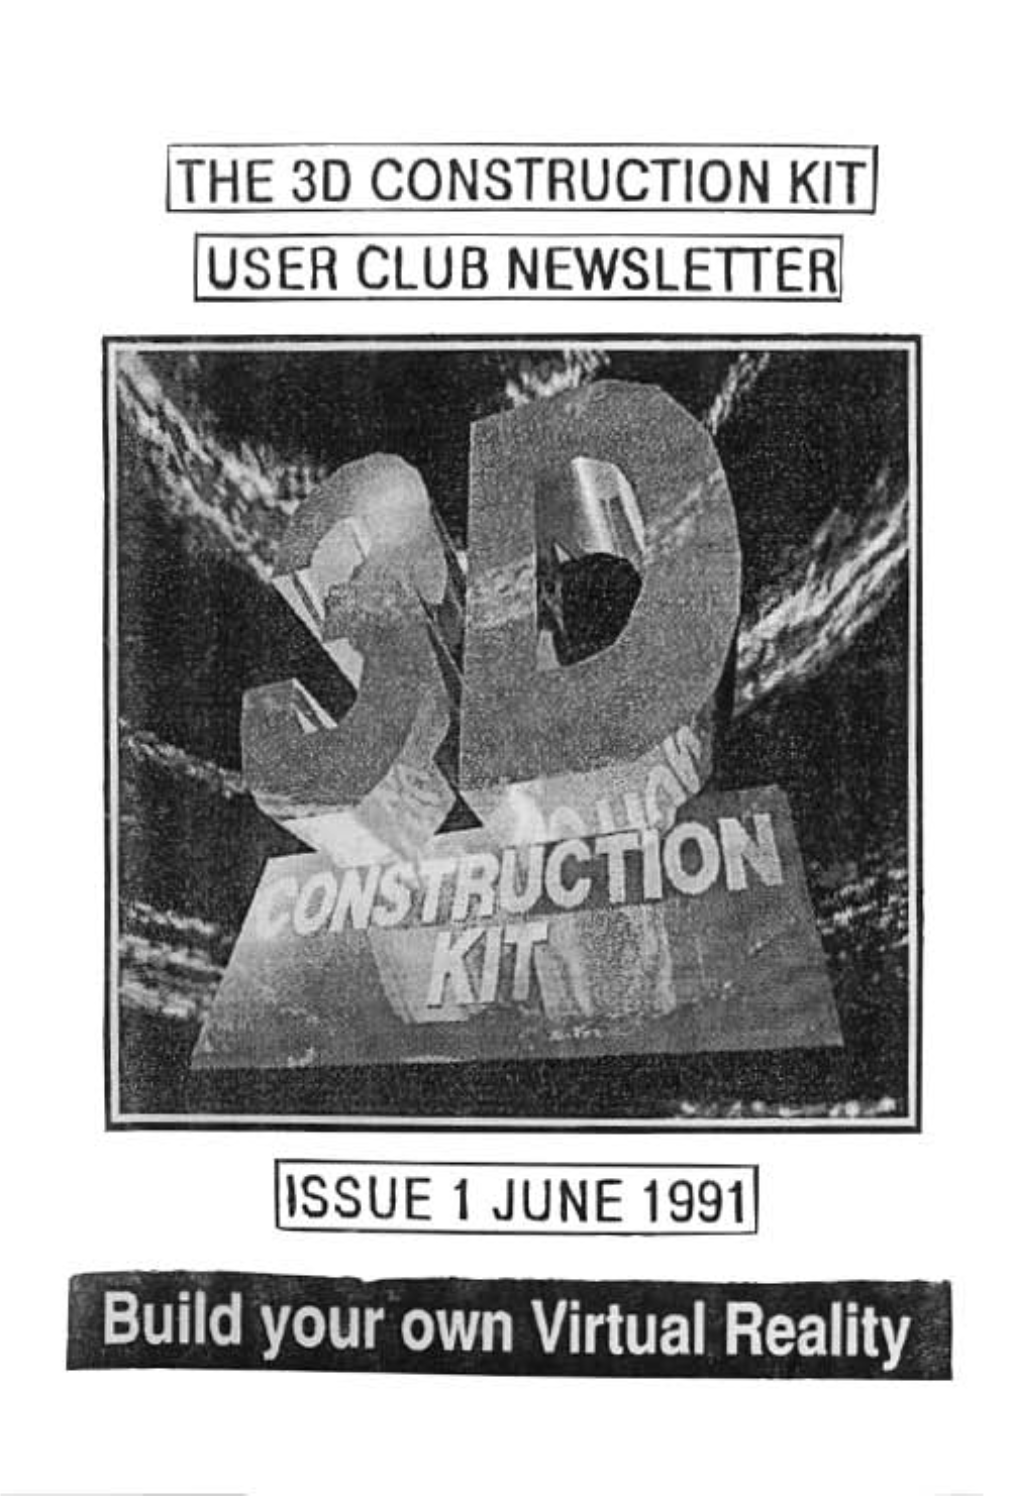 ISSUE 1 JUNE 1991 1 Build Your Own Virtual Reality Variable 53: X Coordinate at Beach Head When Going to Desert Island